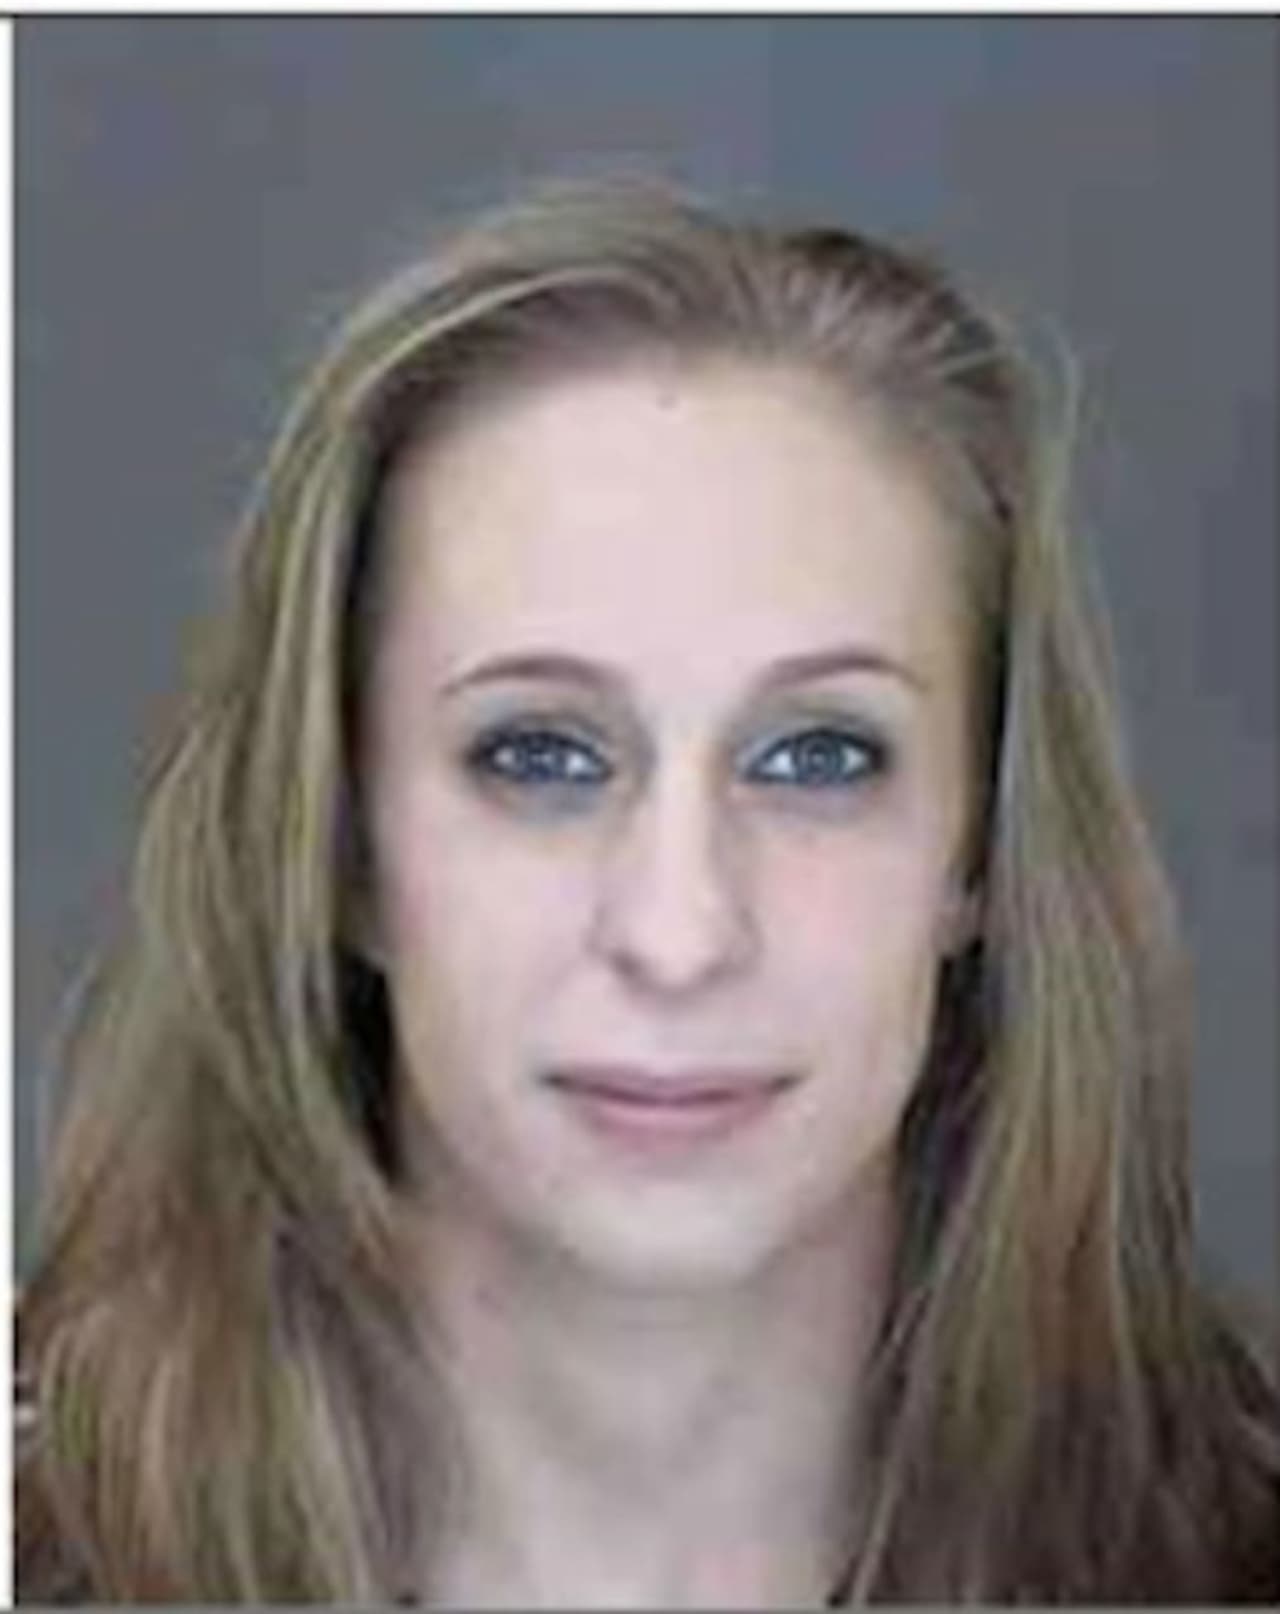 The Ramapo Police are asking for the public's help in locating Alexandra Dinucci, who is wanted for prostitution.